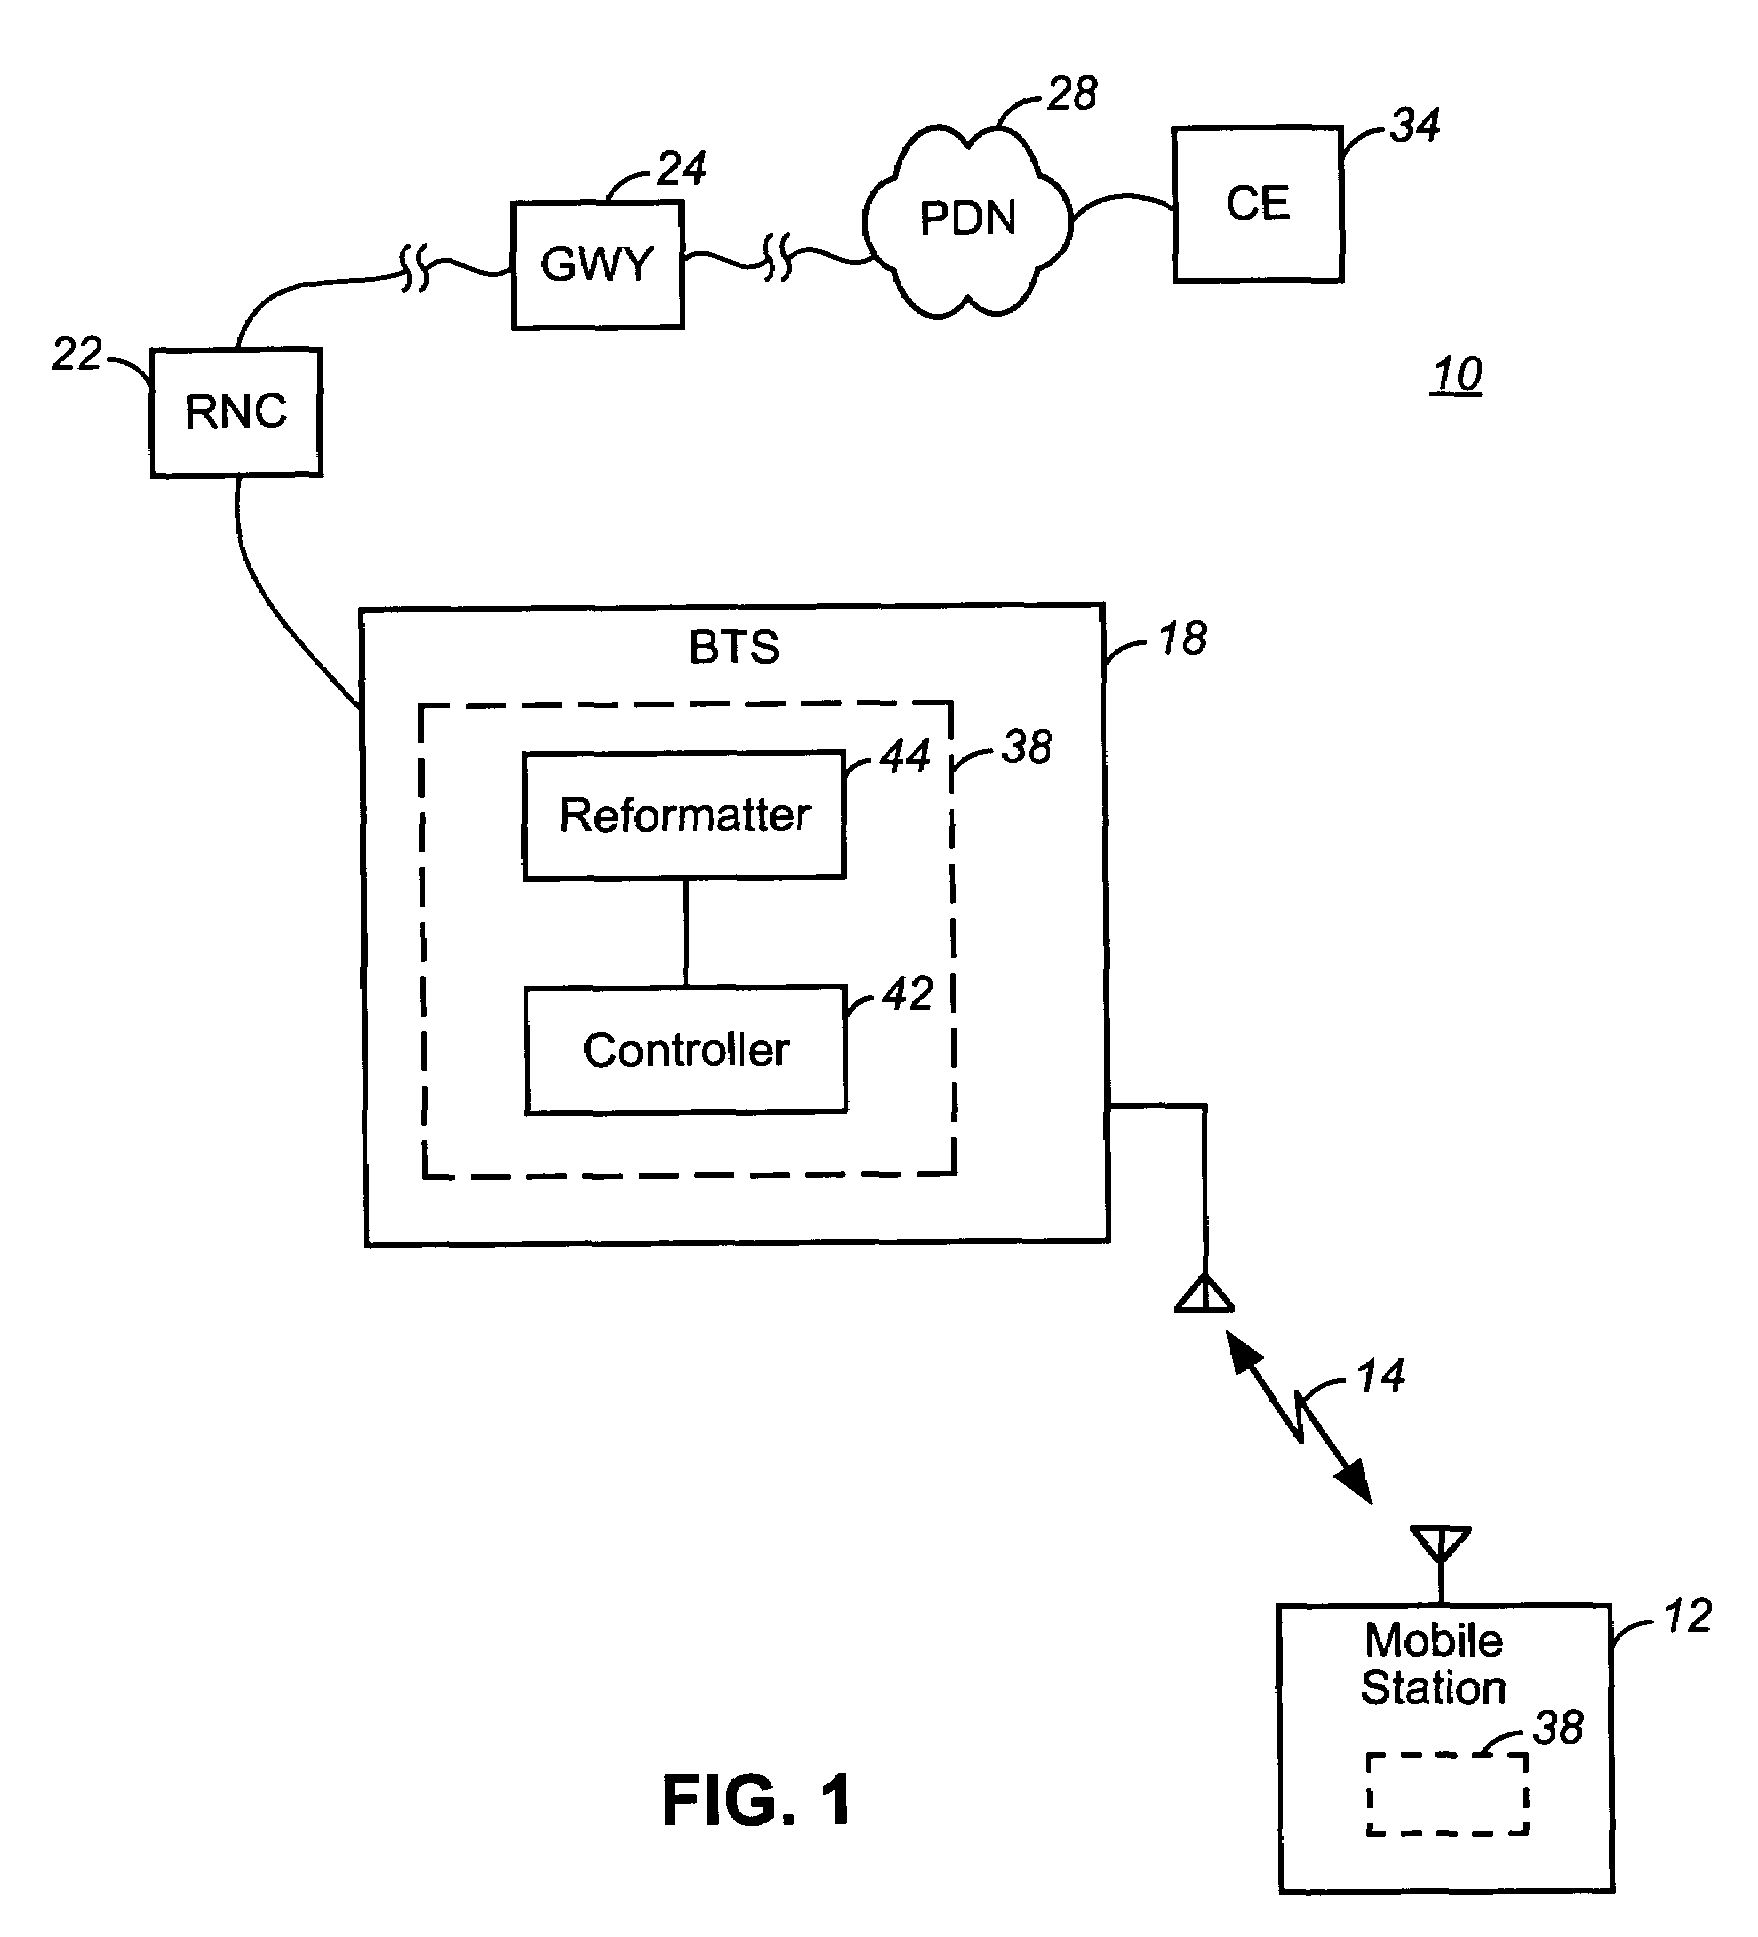 Apparatus, and associated method, for operating upon data at RLP logical layer of a communication station